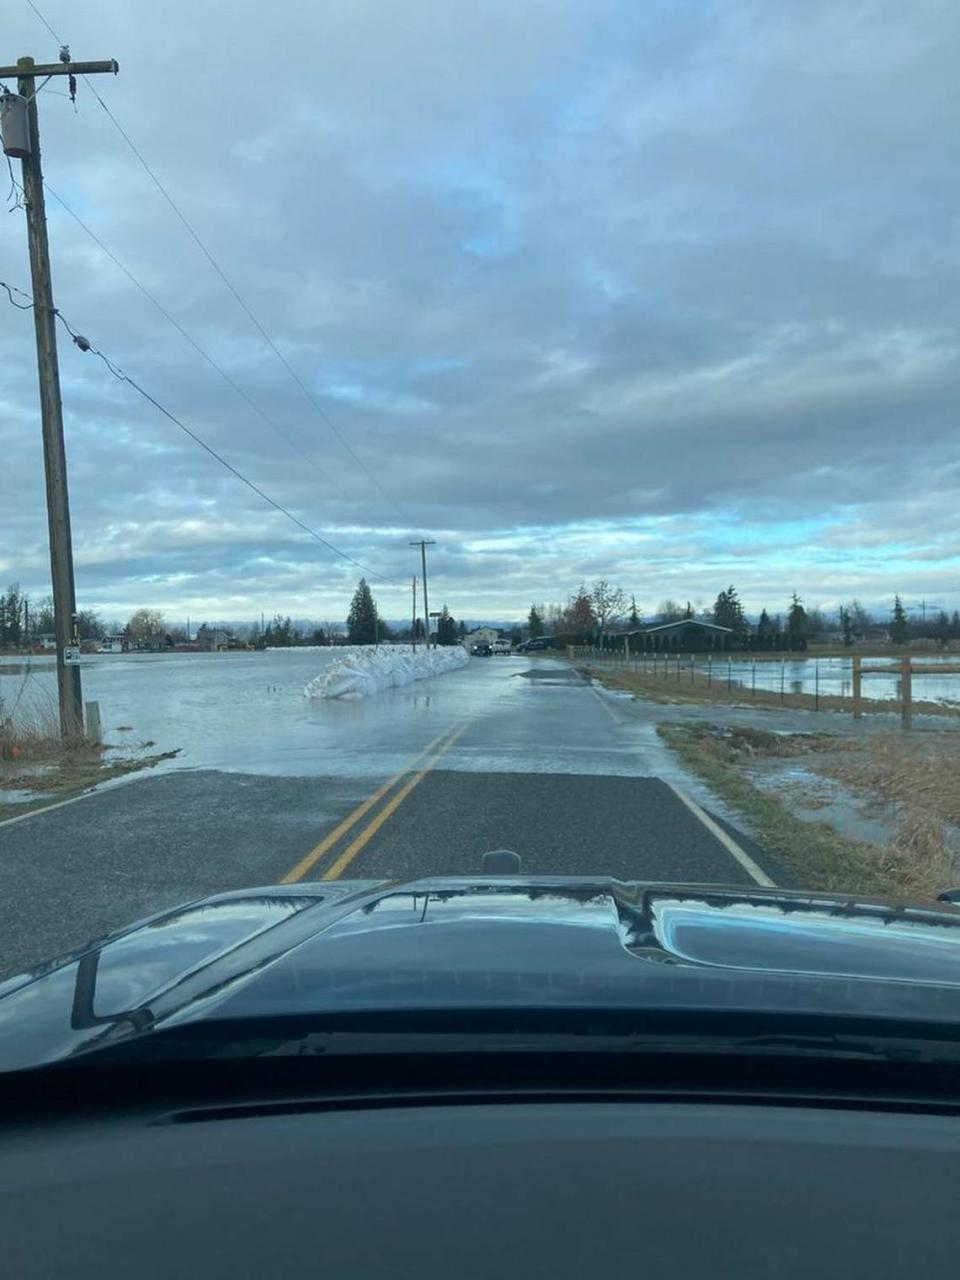 Police closed Emerson Road south of downtown Everson because of water over the pavement on Sunday as the Nooksack River rose sharply amid heavy rain across Whatcom County and causing rapid snowmelt in the mountains.